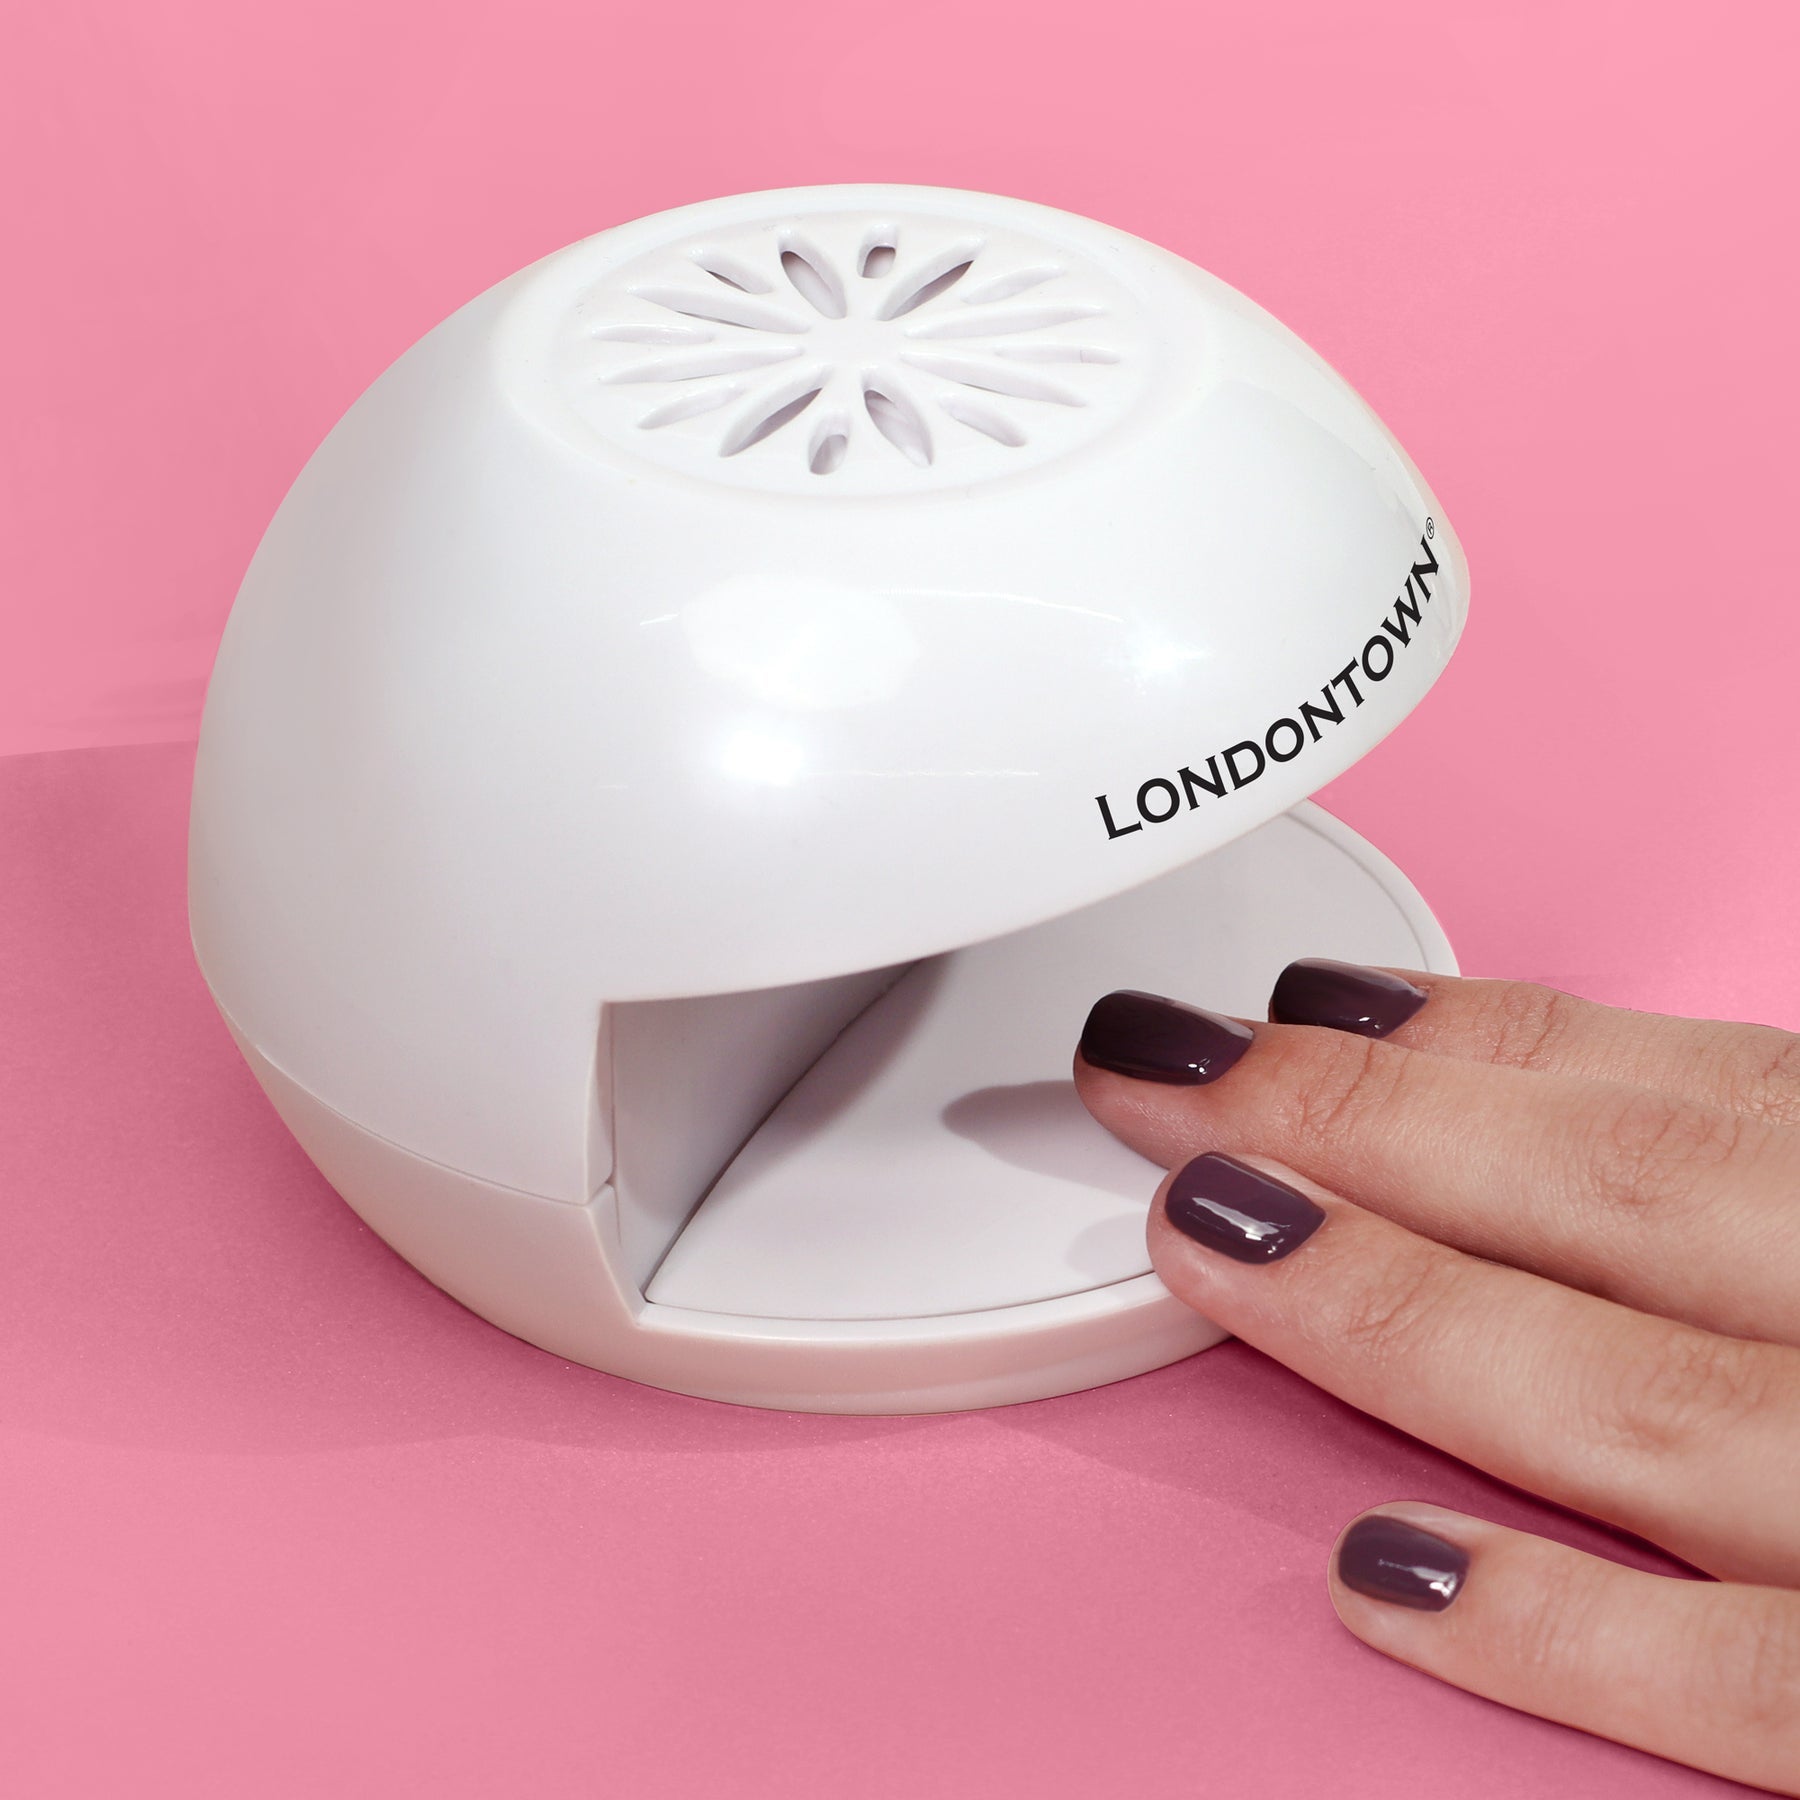 10 Incredible Nail Dryer Spray For 2023